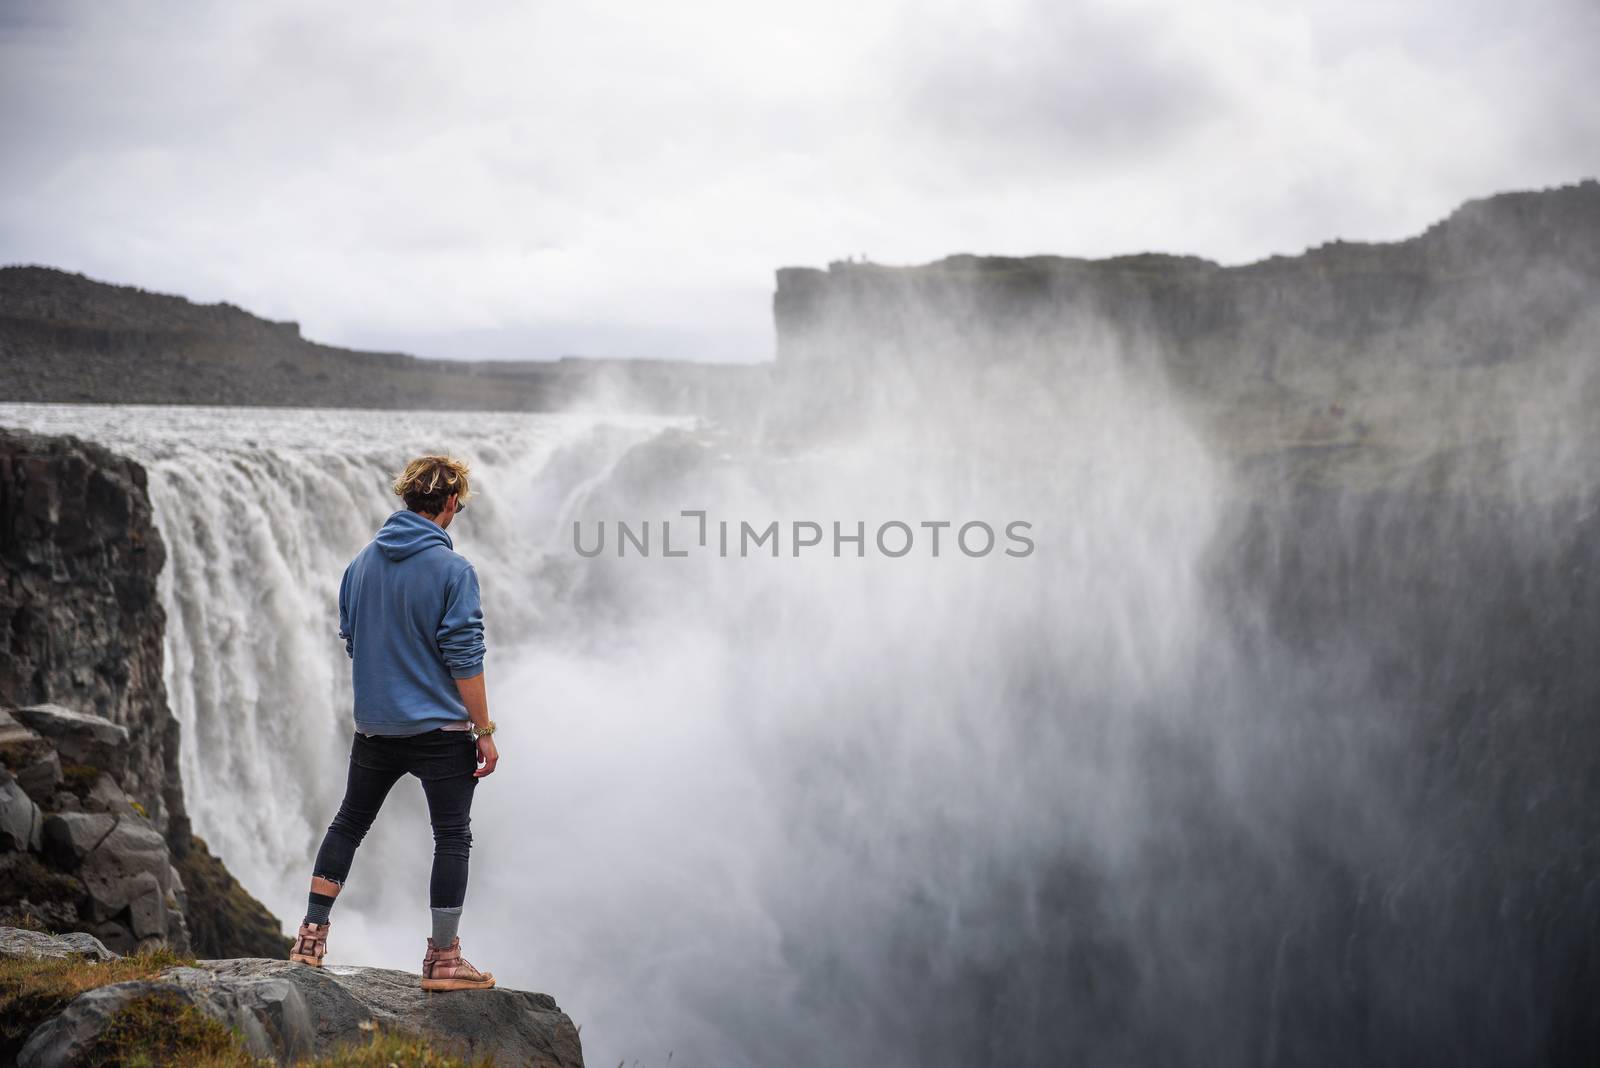 Young hiker standing at the edge of the Dettifoss waterfall located on the Jokulsa a Fjollum river in Iceland. Dettifoss is the second most powerful waterfall in Europe after the Rhine Falls.